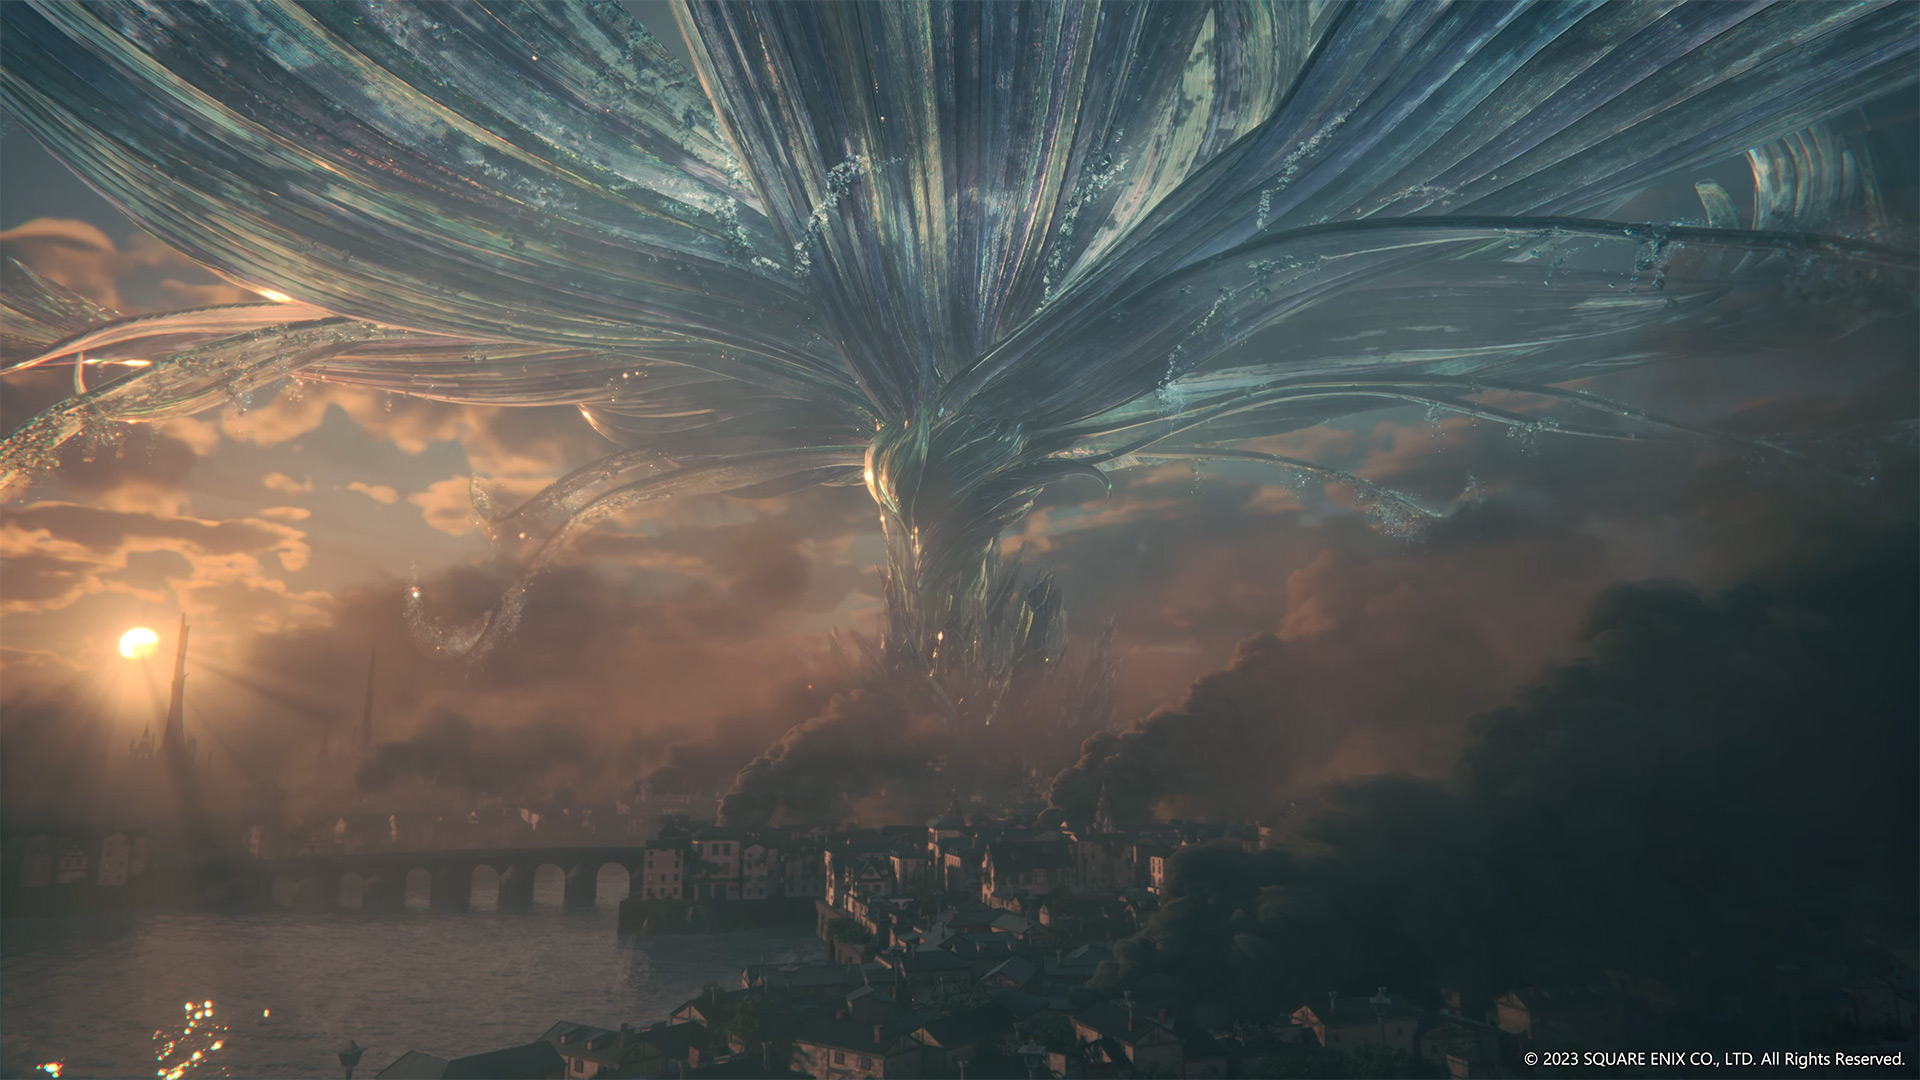 Final Fantasy XVI's launch trailer, Salvation, made its debut during the PlayStation Showcase